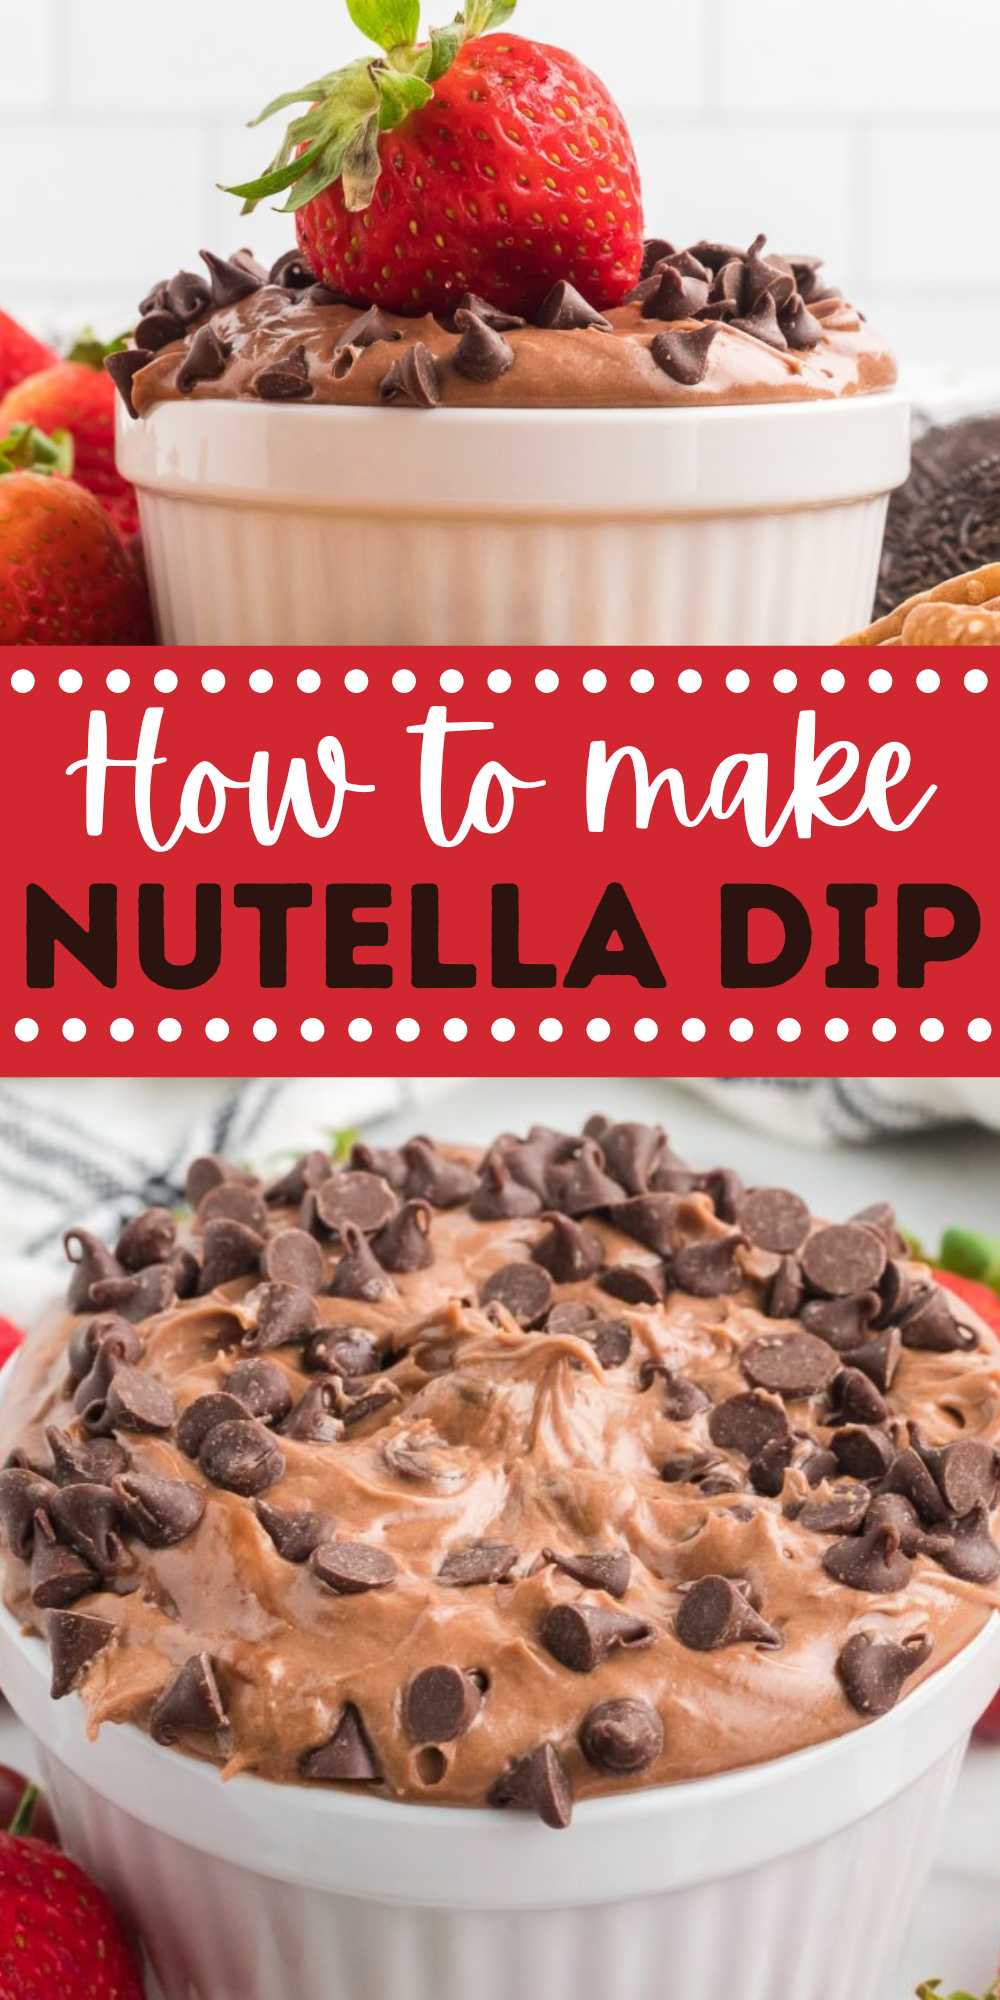 If your kids love Nutella, then you need to make this Nutella Dip. It is creamy, delicious and perfect served with fruit and cookies. The next time you are at the grocery store, grab these simple ingredients to make this dip. You will love the flavor and the different things you can dip into it. #eatingonadime #nutelladip #nutella